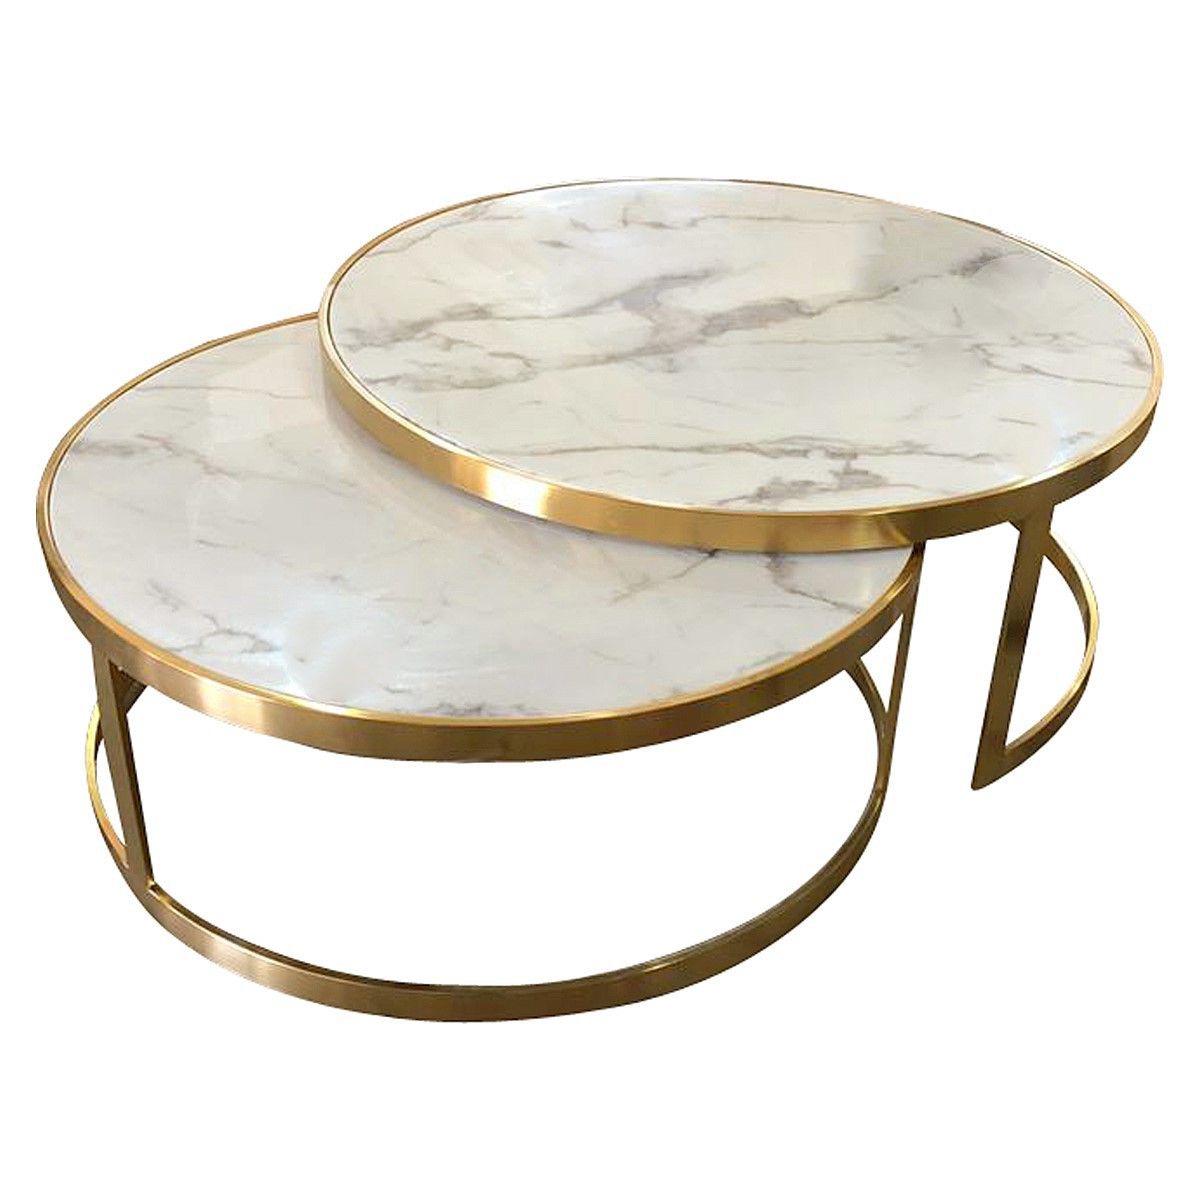 Most Recent Faux Marble Coffee Tables Throughout Mirabello 2 Piece Faux Marble Topped Metal Round Nesting (View 15 of 20)